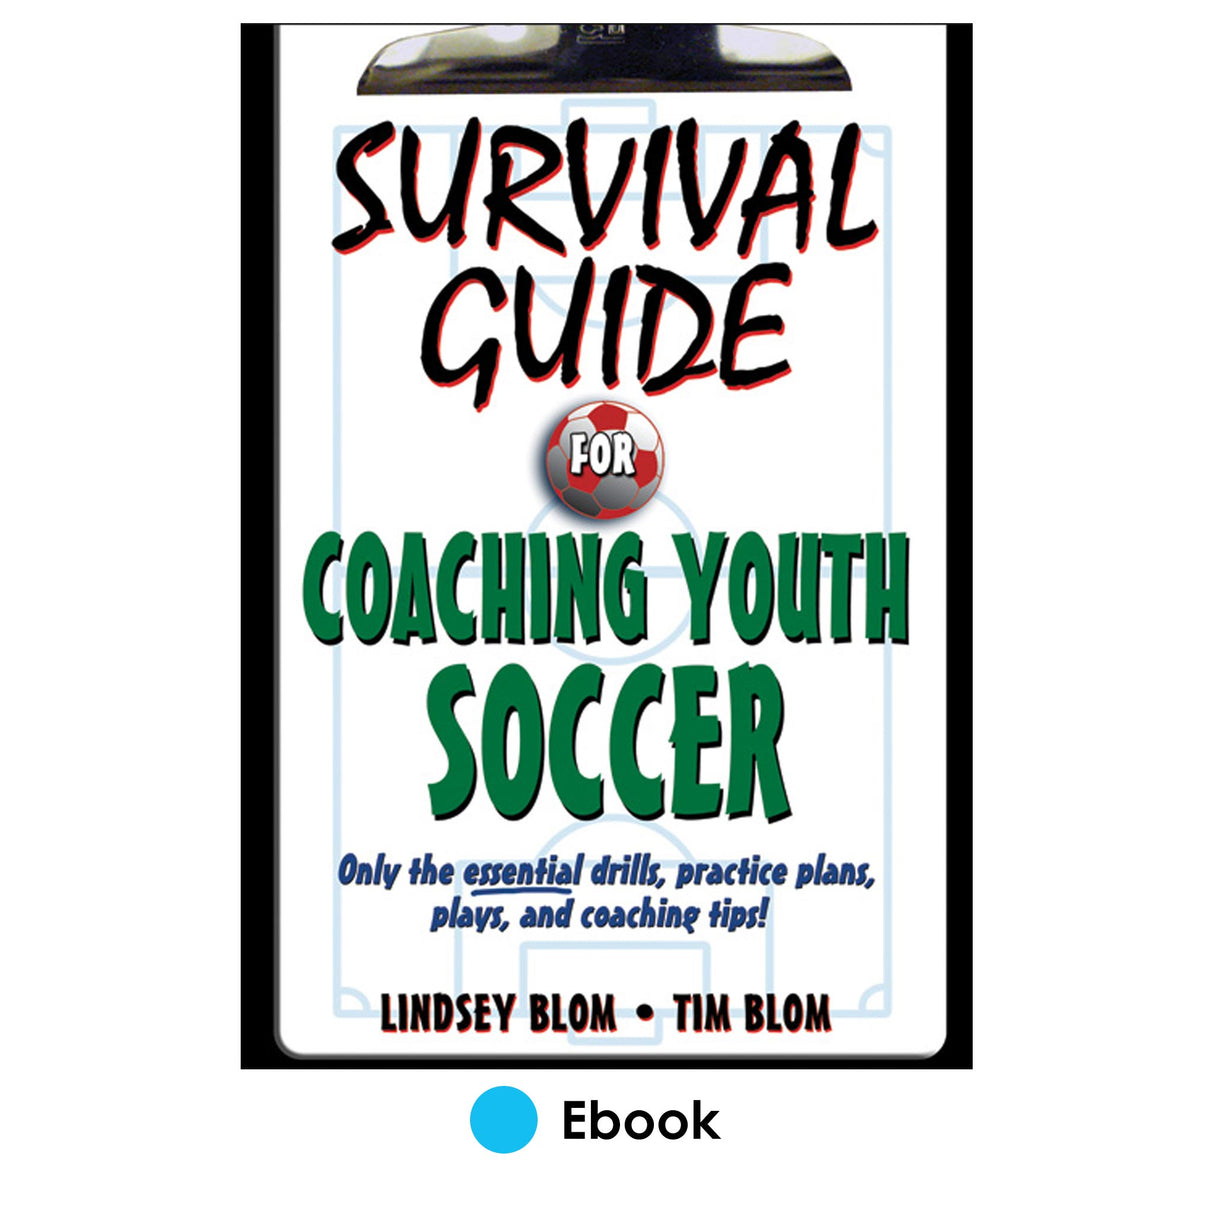 Survival Guide for Coaching Youth Soccer PDF